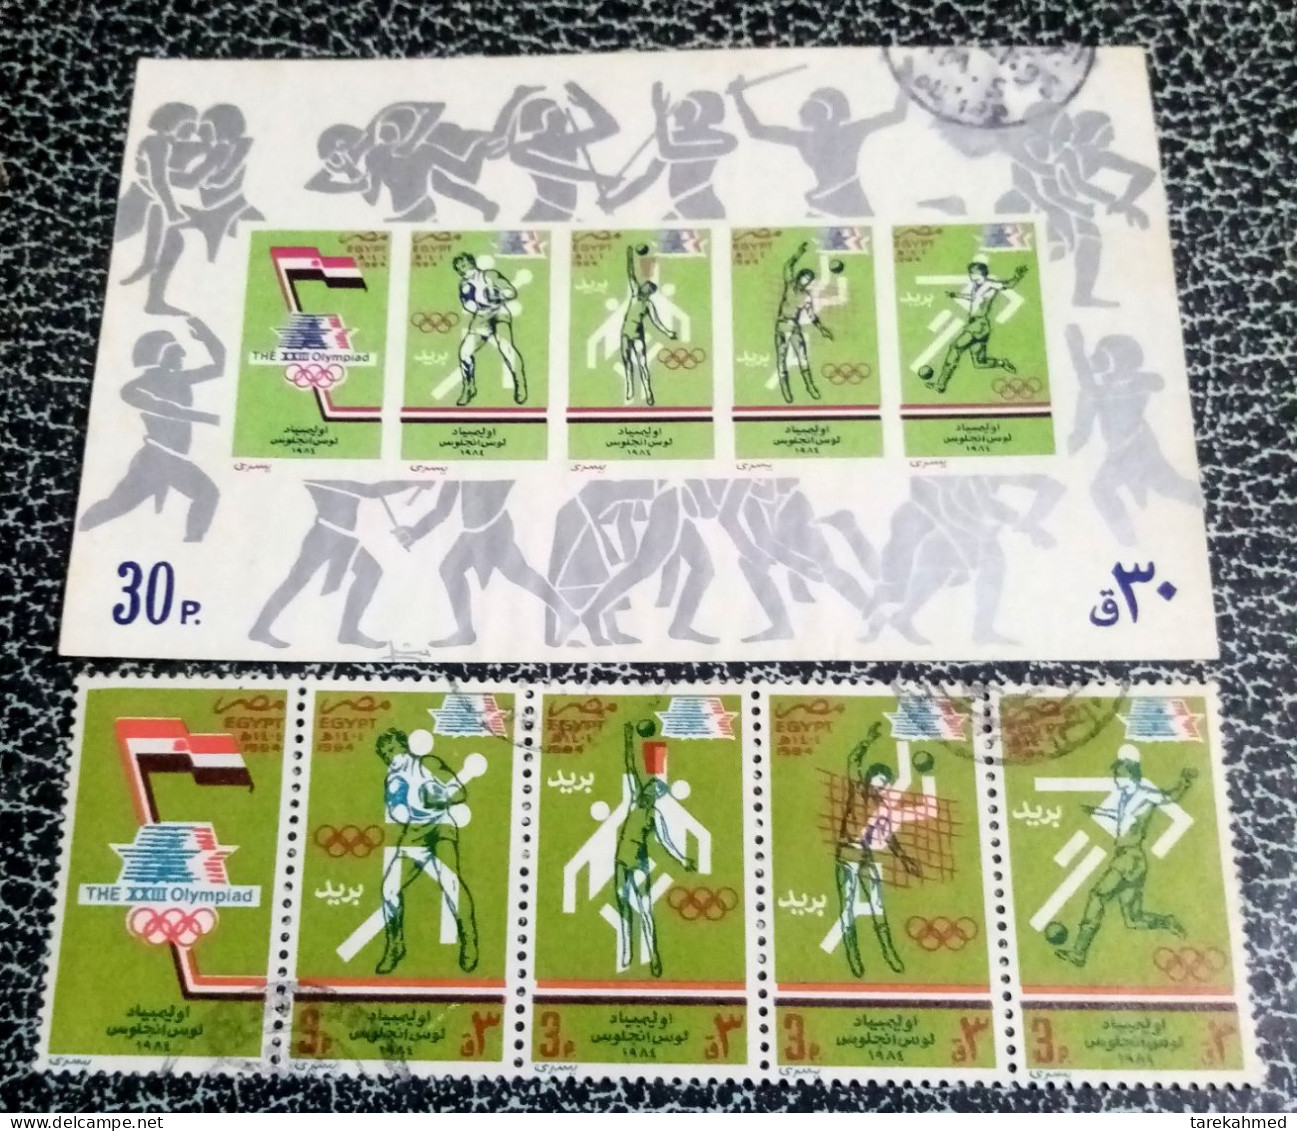 EGYPT -Complete Set Of The Olympic Games 1984-Los Angeles Olympics With The Souvenir Sheet, VF - Gebraucht